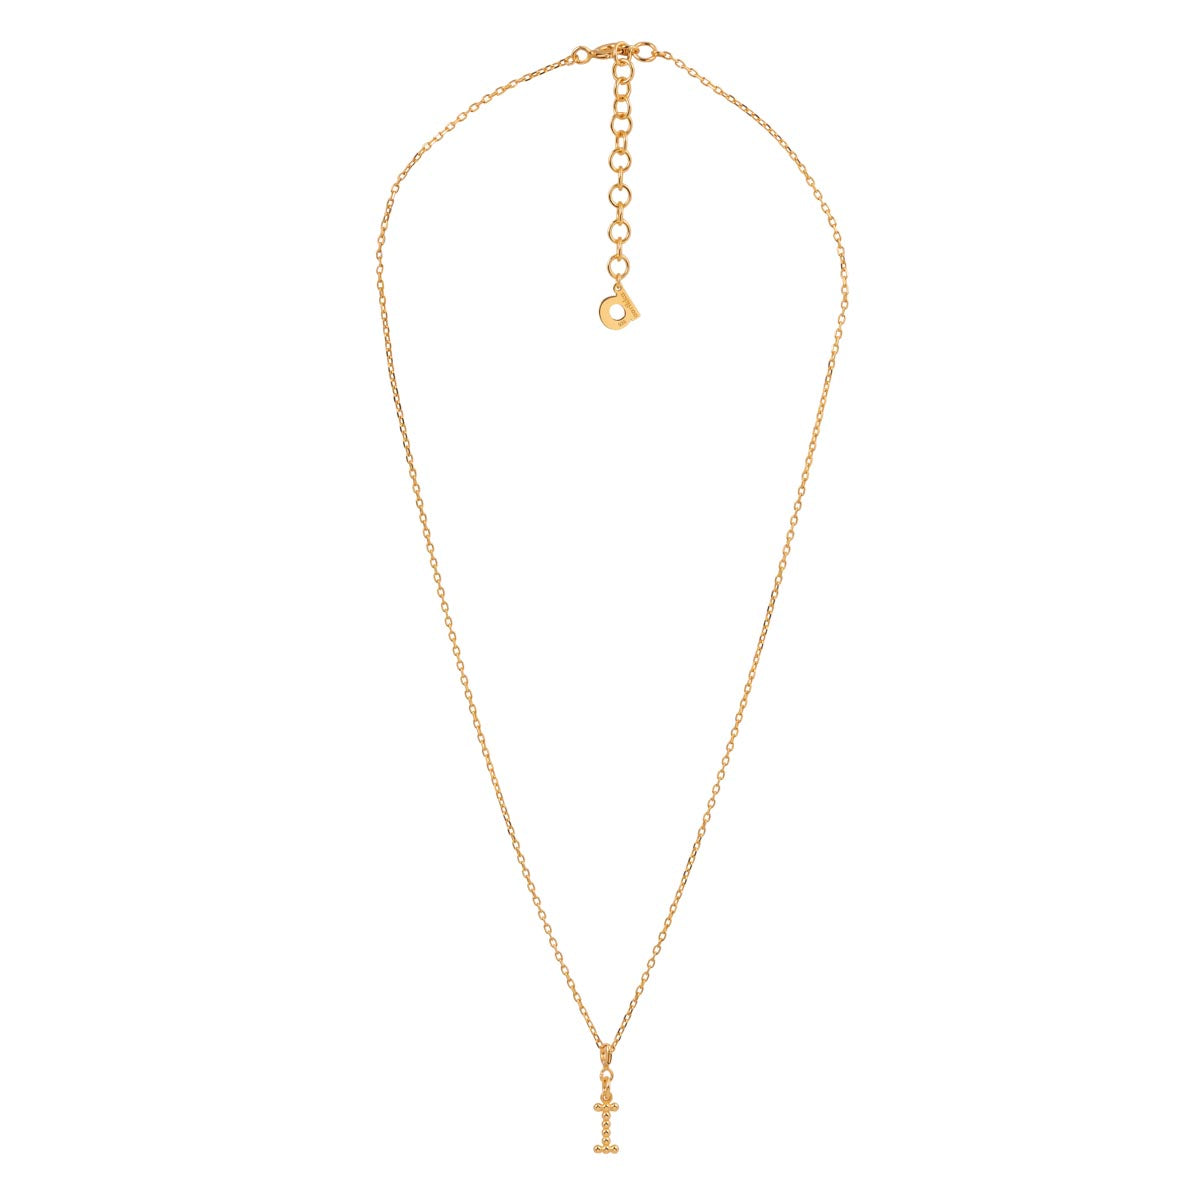 Yllätys Monogram Necklace I, gold-plated silver